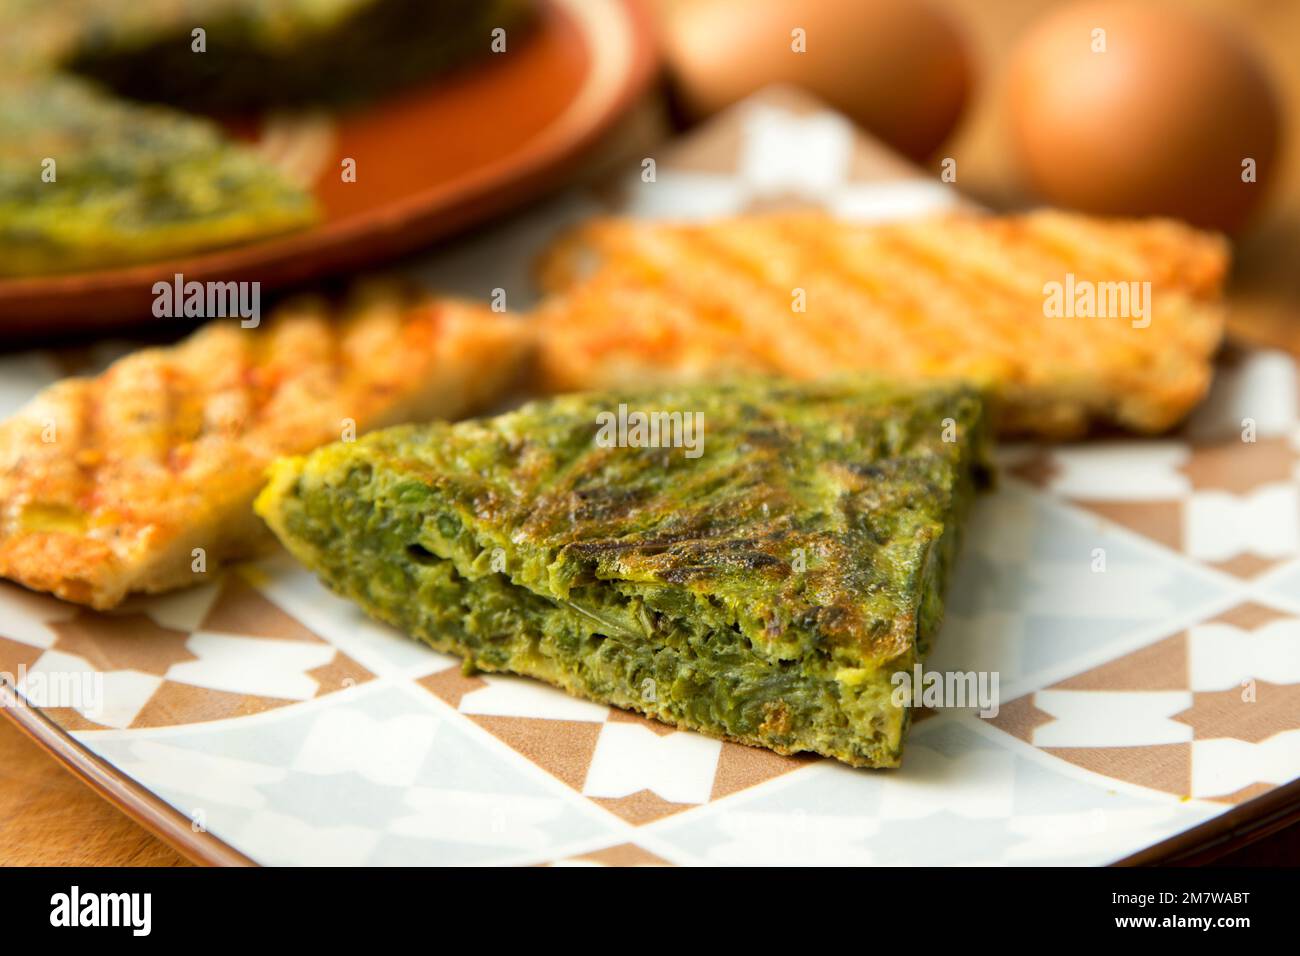 Green asparagus potato omelette. The potato omelette, or Spanish omelette is an omelette or omelette to which chopped potatoes are added. Stock Photo